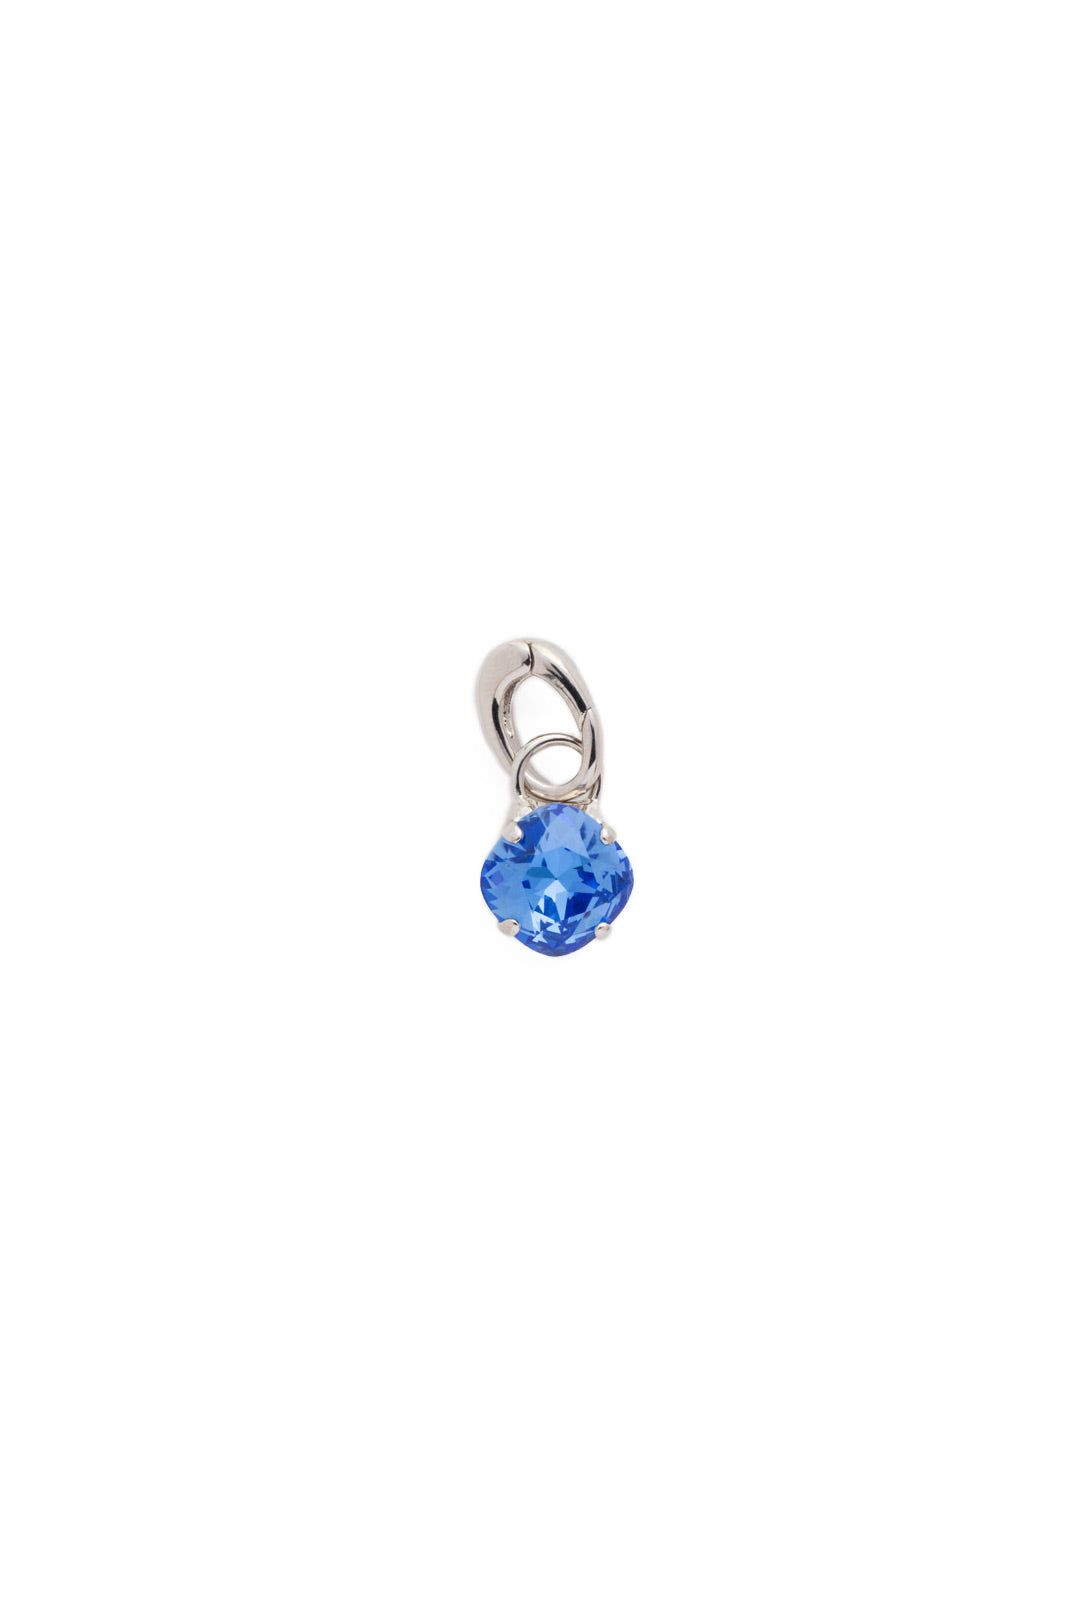 Product Image: September Birthstone Sapphire Charm